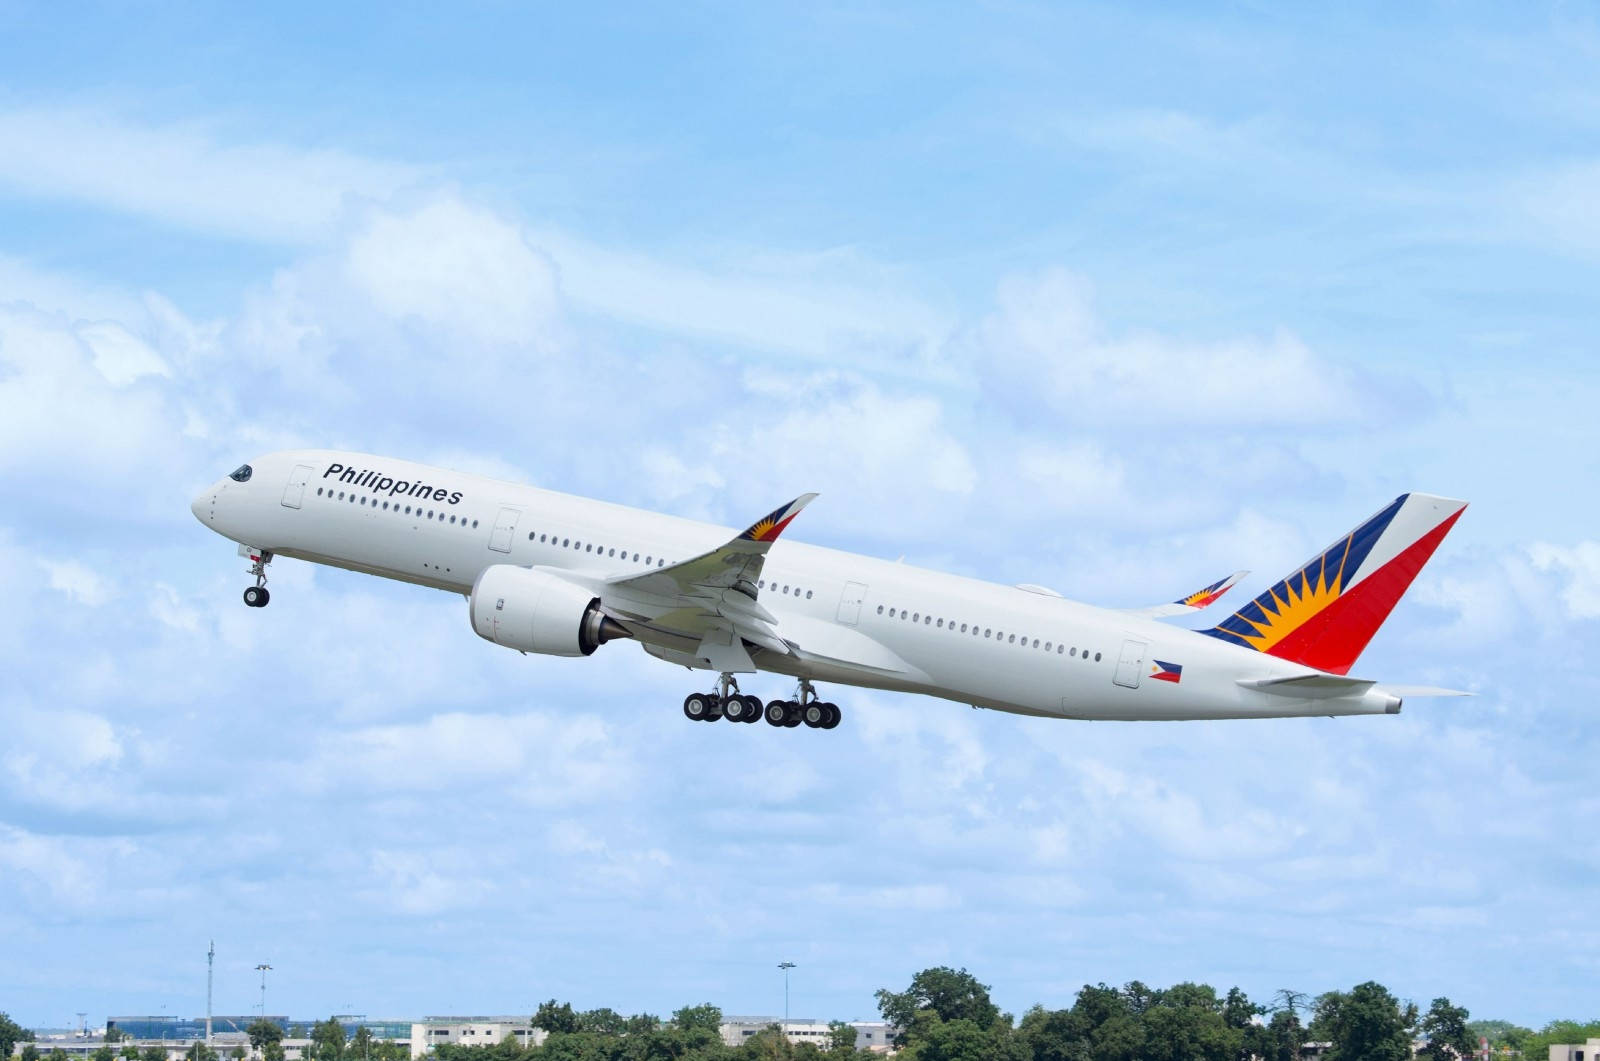 Philippine Airlines Plane Taking Off Wallpaper